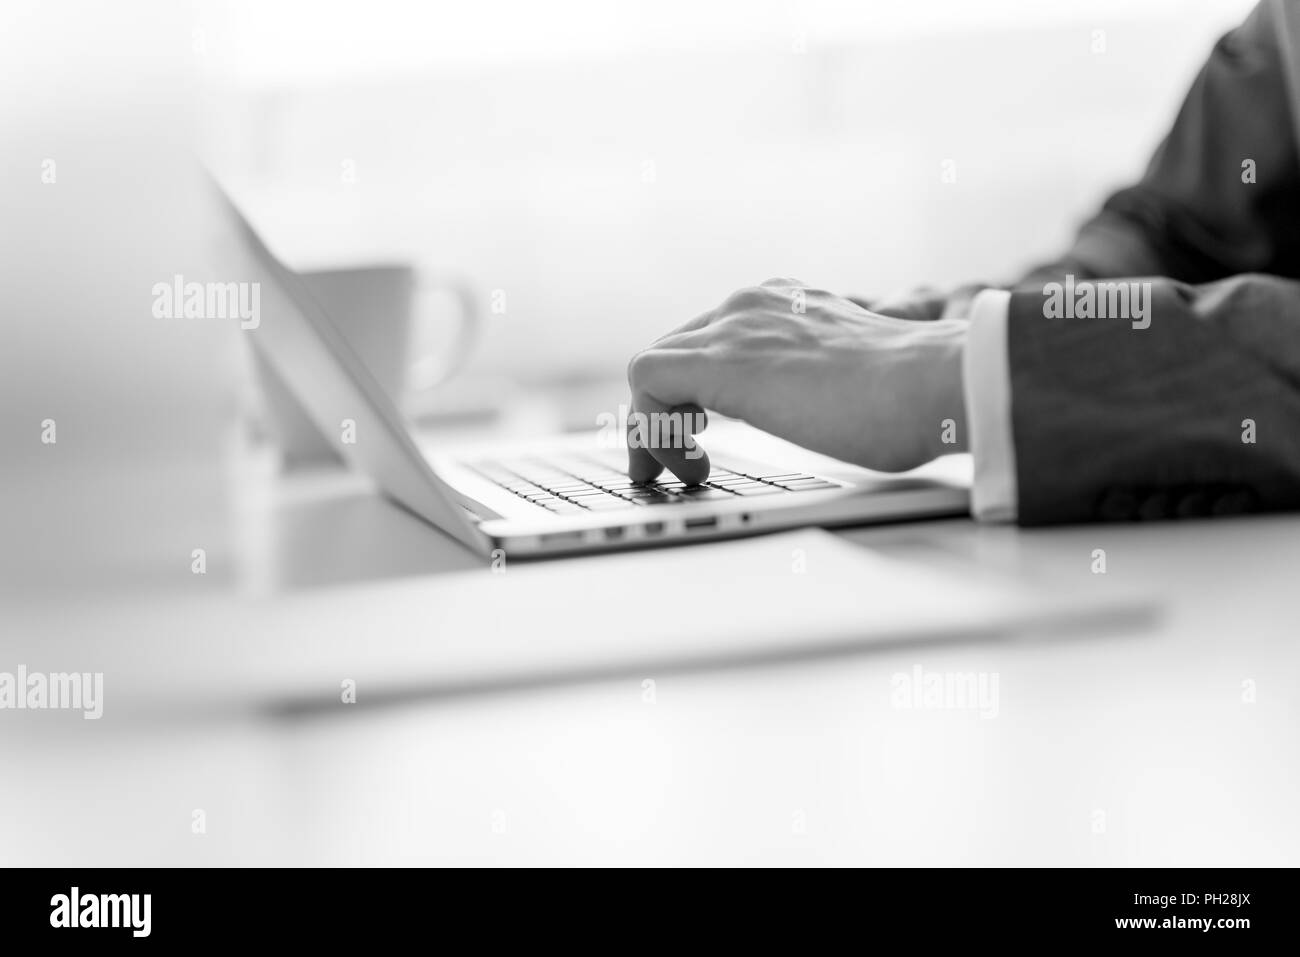 Close up view of the hands of a businessman in a suit typing data on a laptop computer in a selective focus greyscale image. Stock Photo